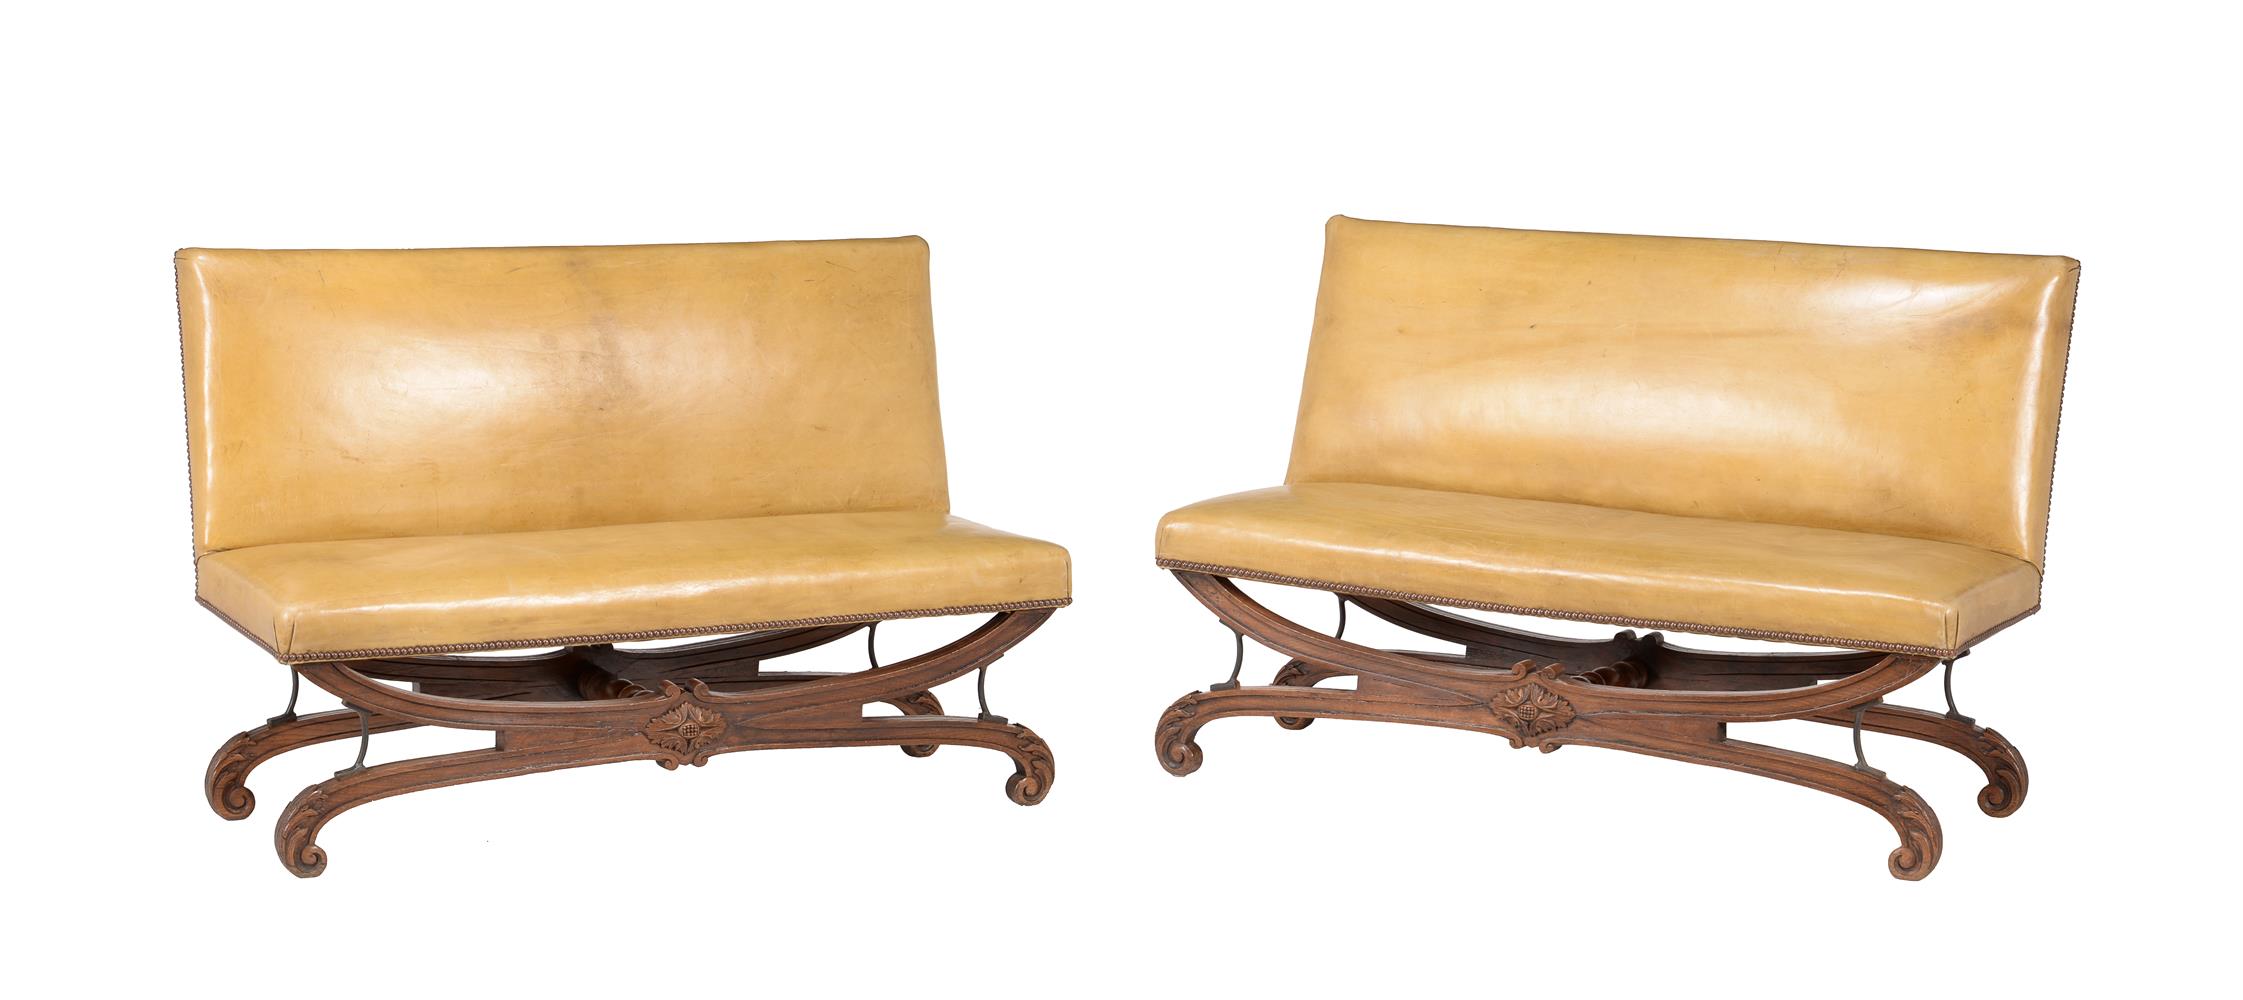 A pair of French carved oak and leather upholstered seats